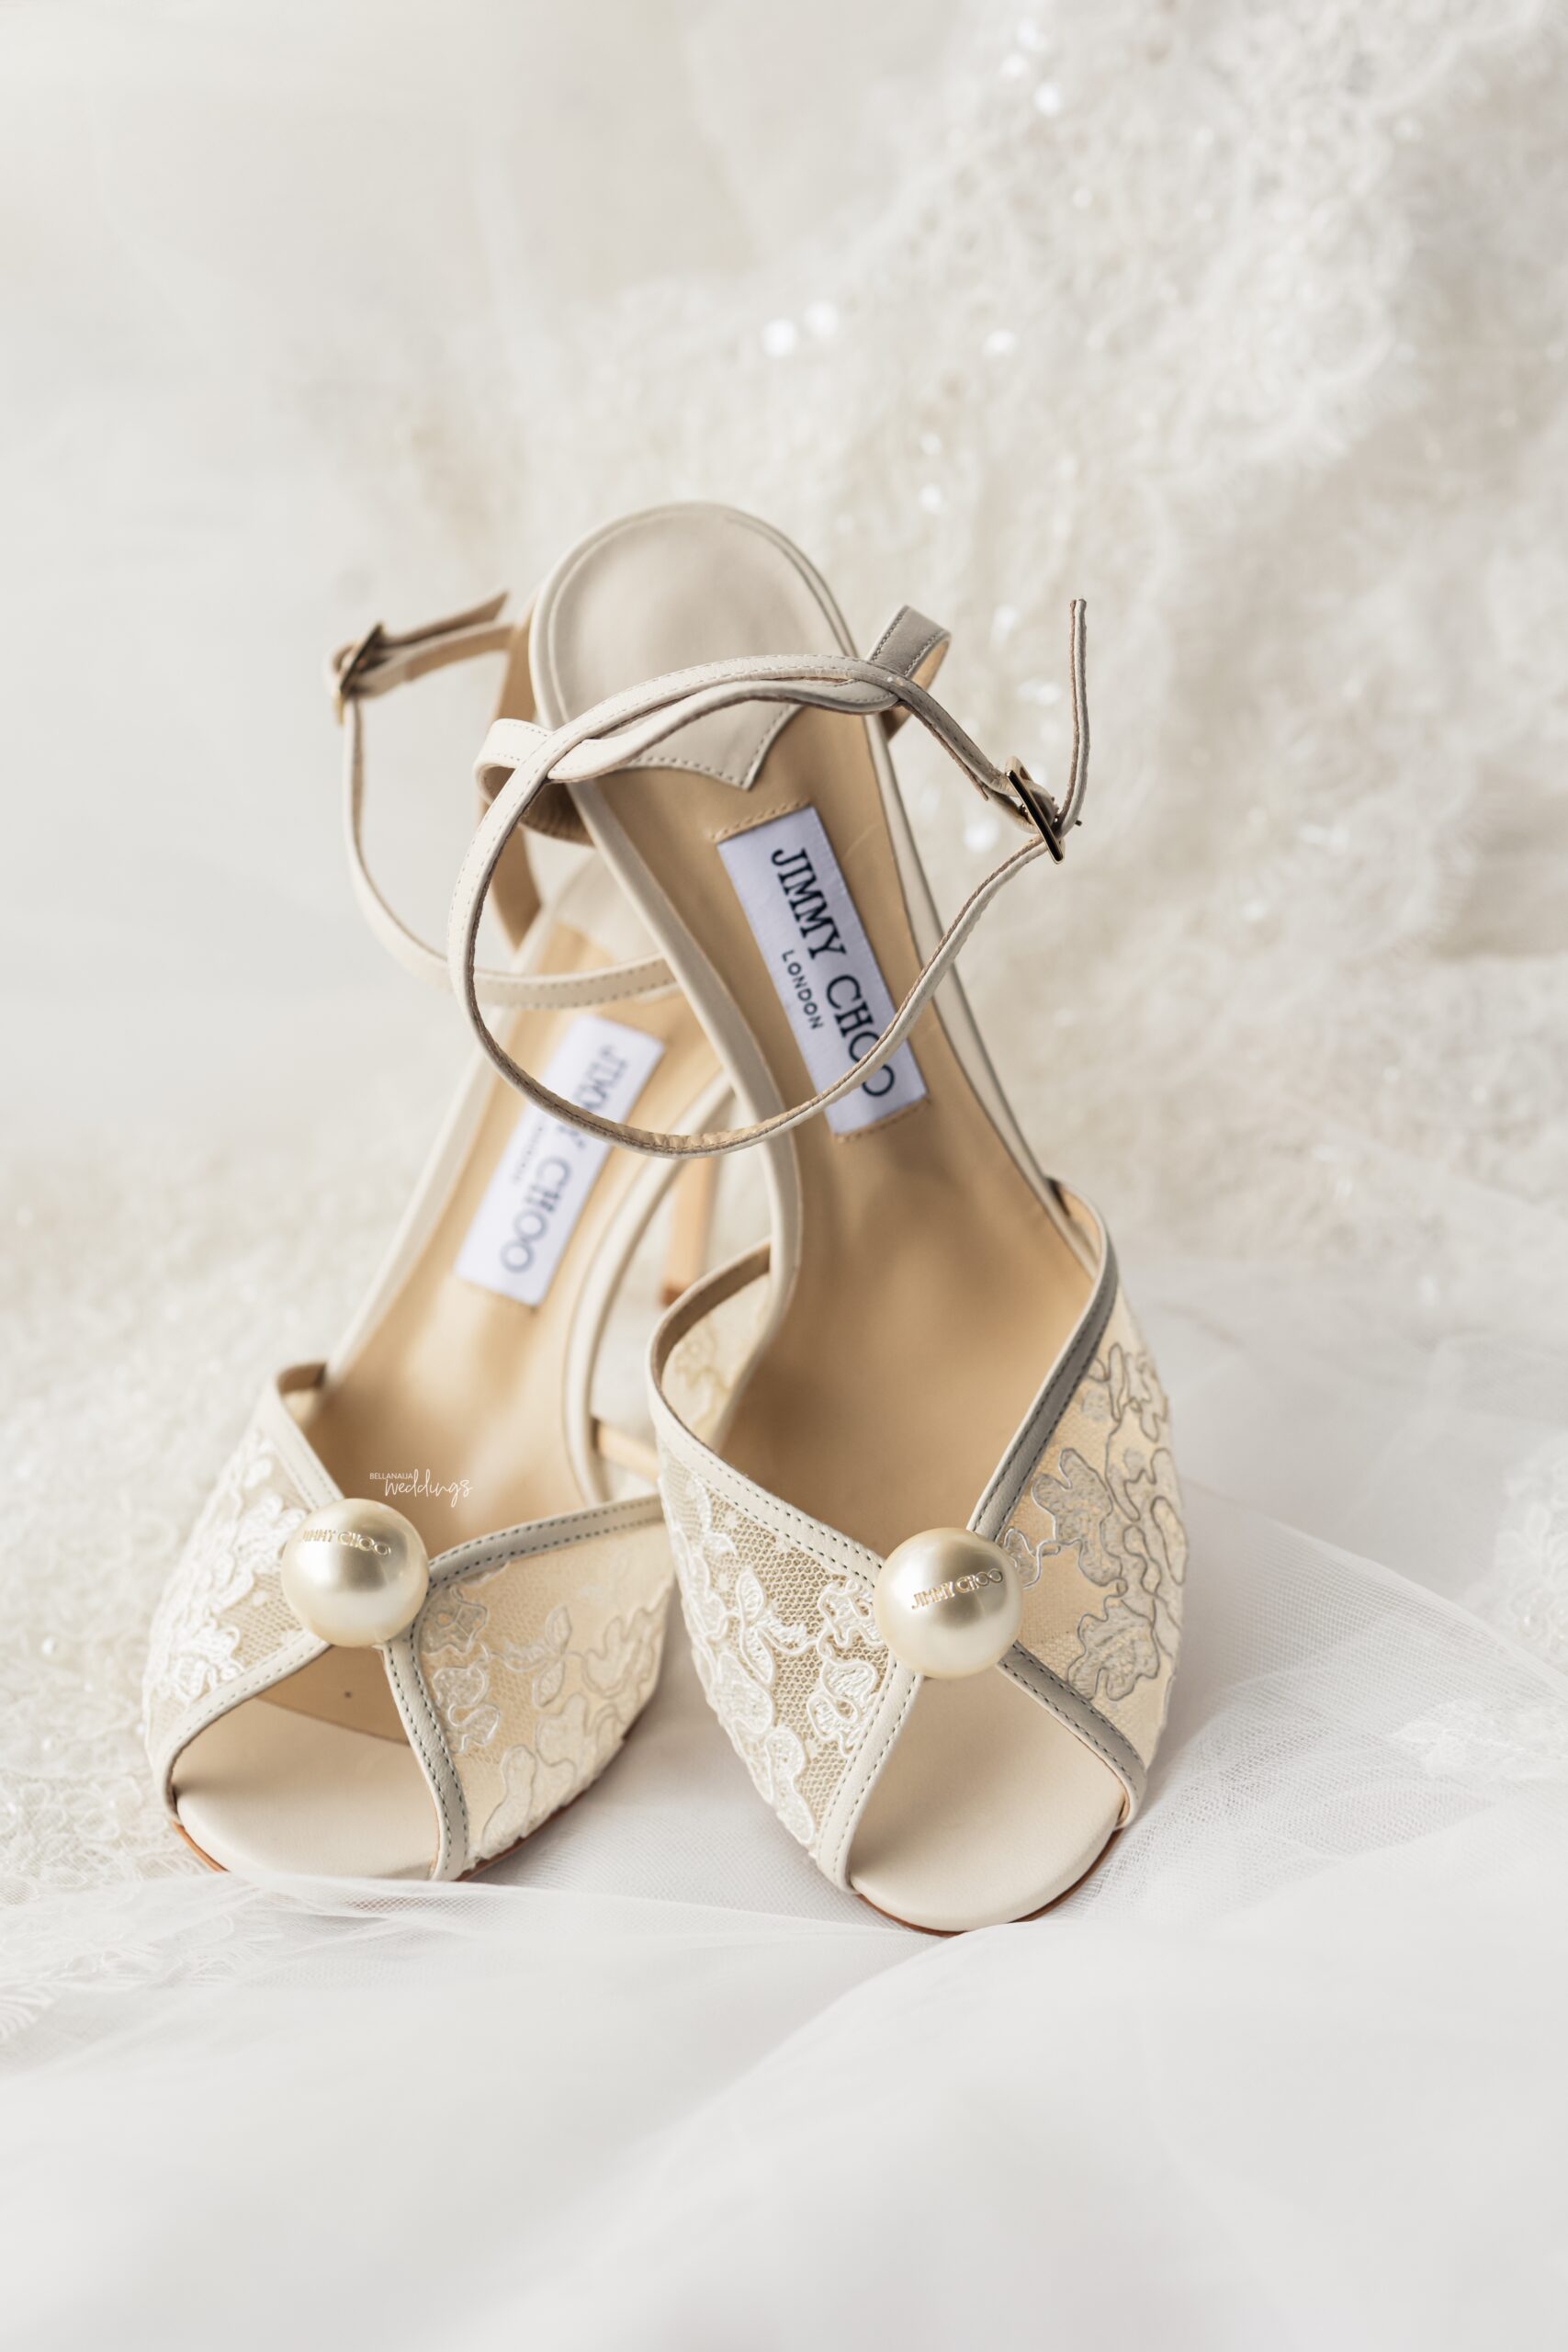 Of Beauty, Love & Colours! Enjoy The #HappilyEverRG Trad & White ...